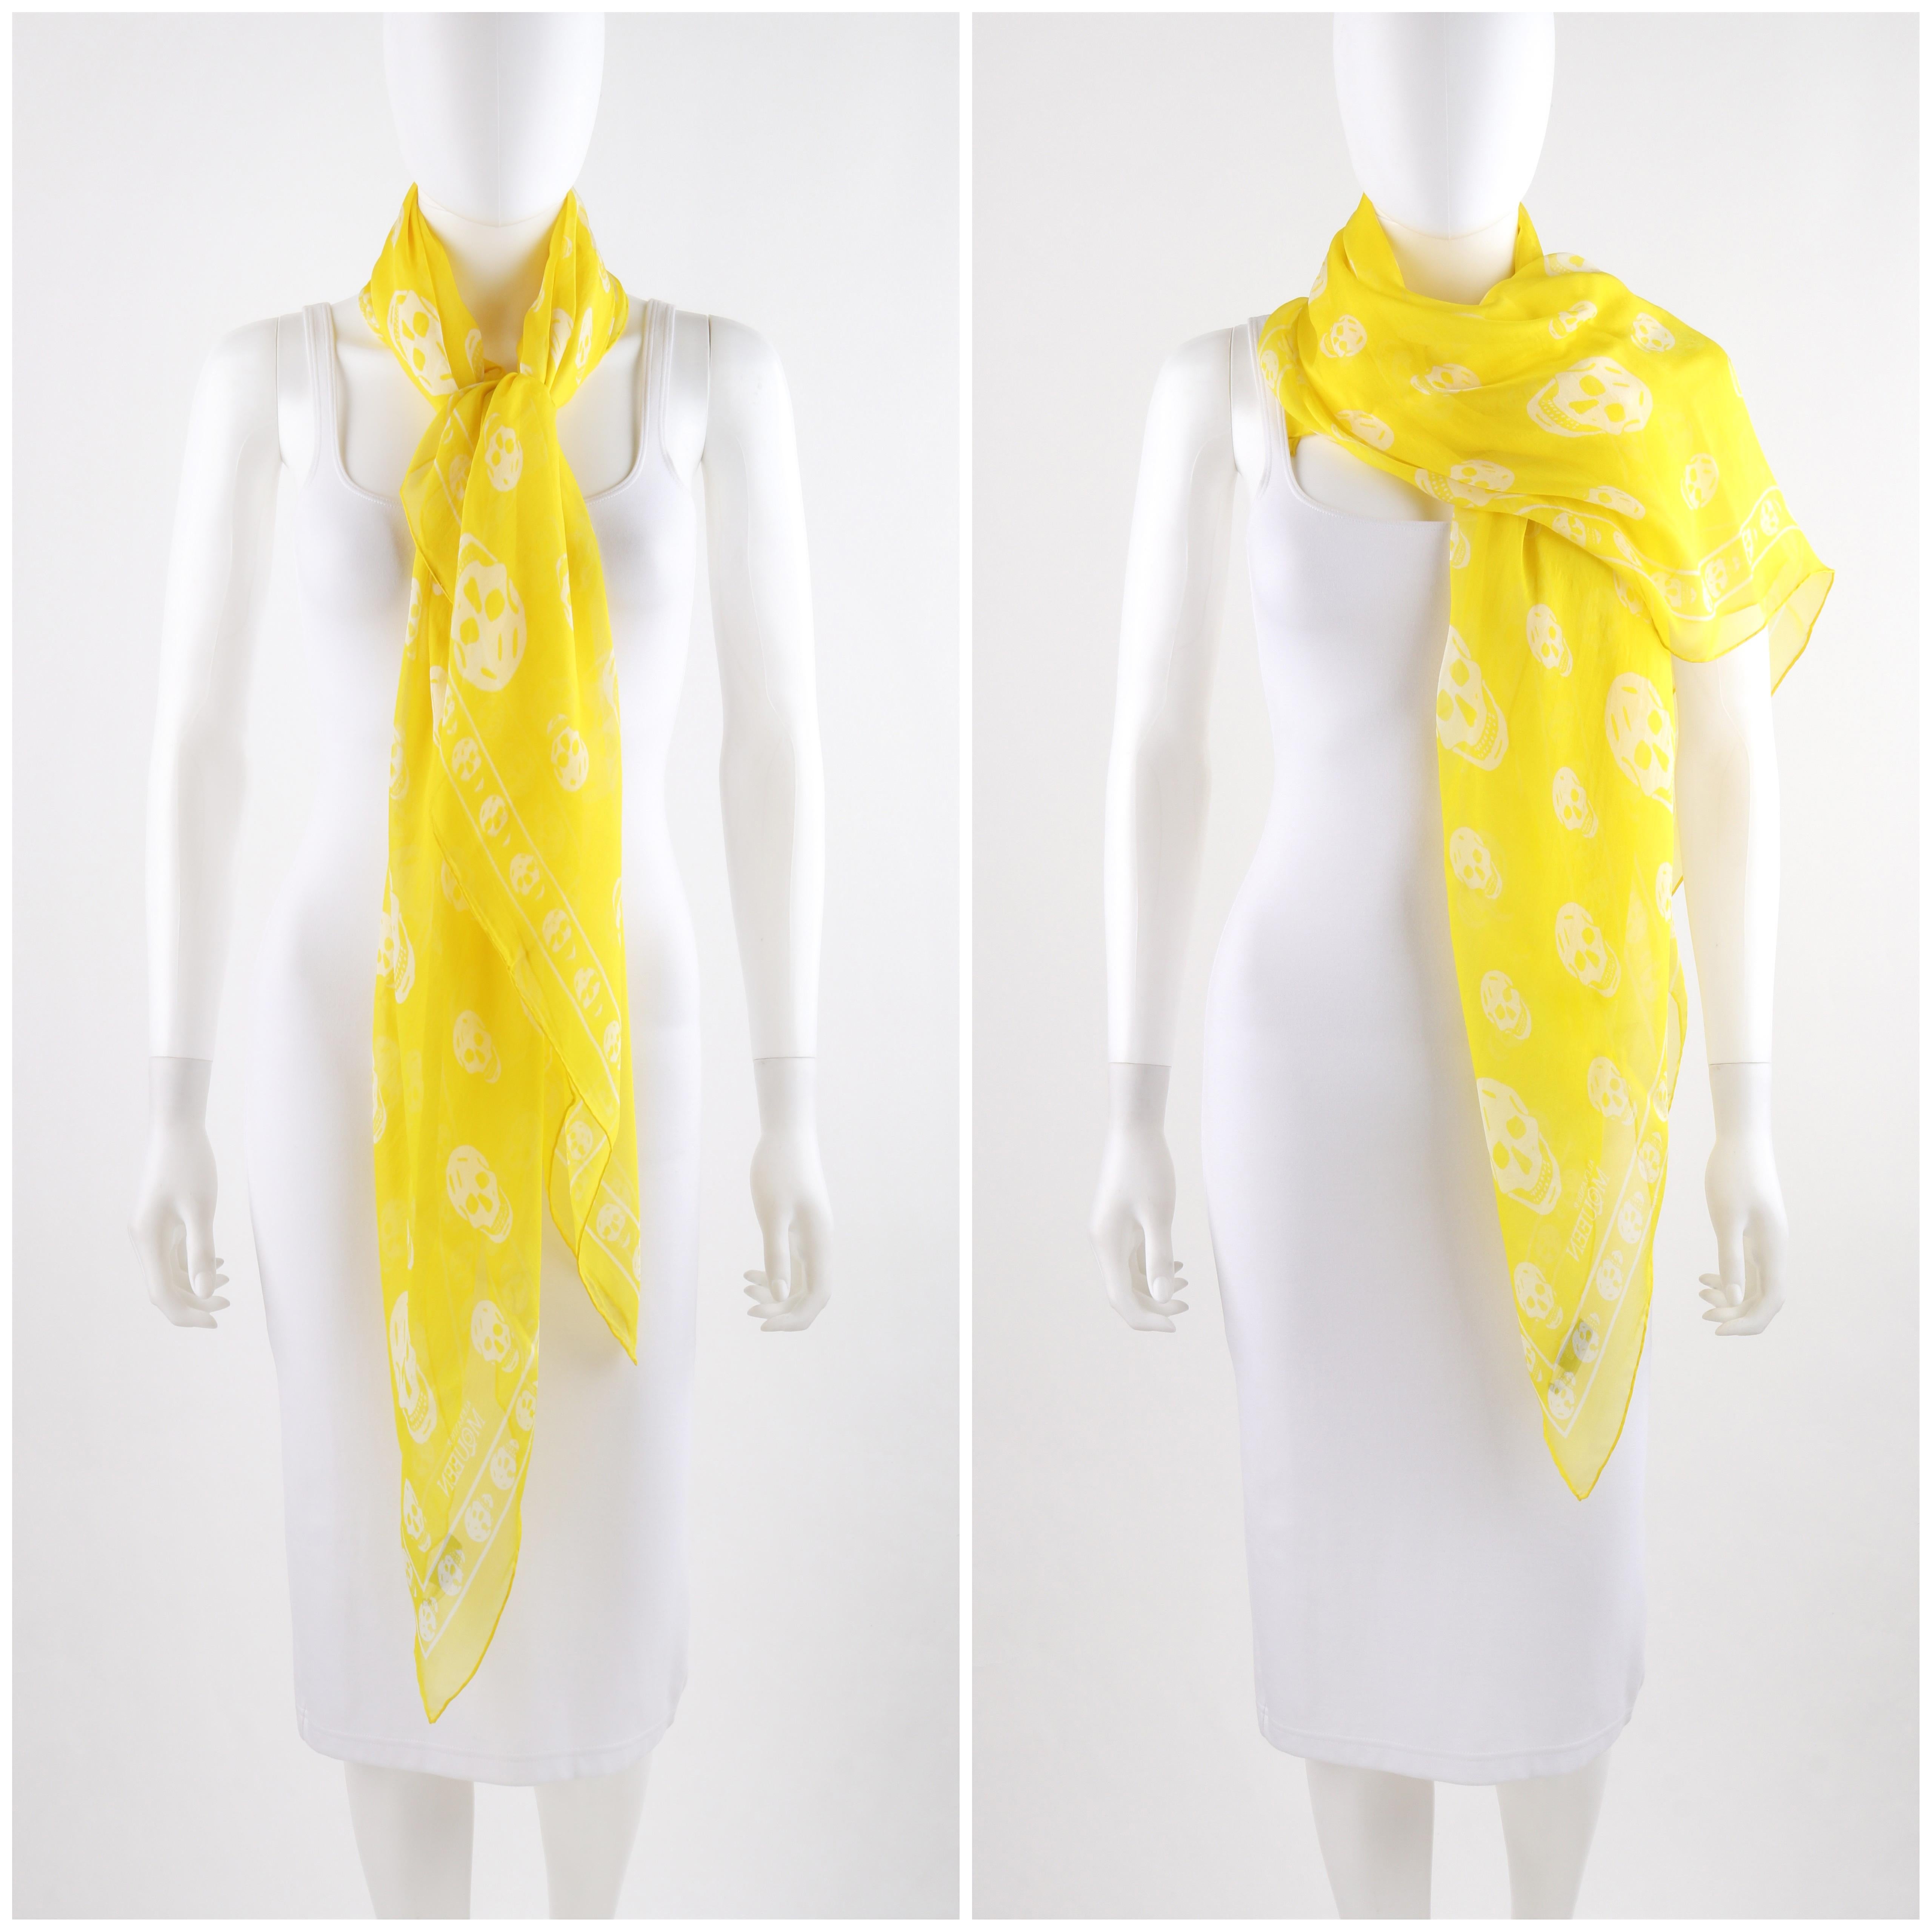 ALEXANDER McQUEEN S/S 2003 Classic Yellow White Skull Print Silk Square Scarf In Good Condition For Sale In Thiensville, WI